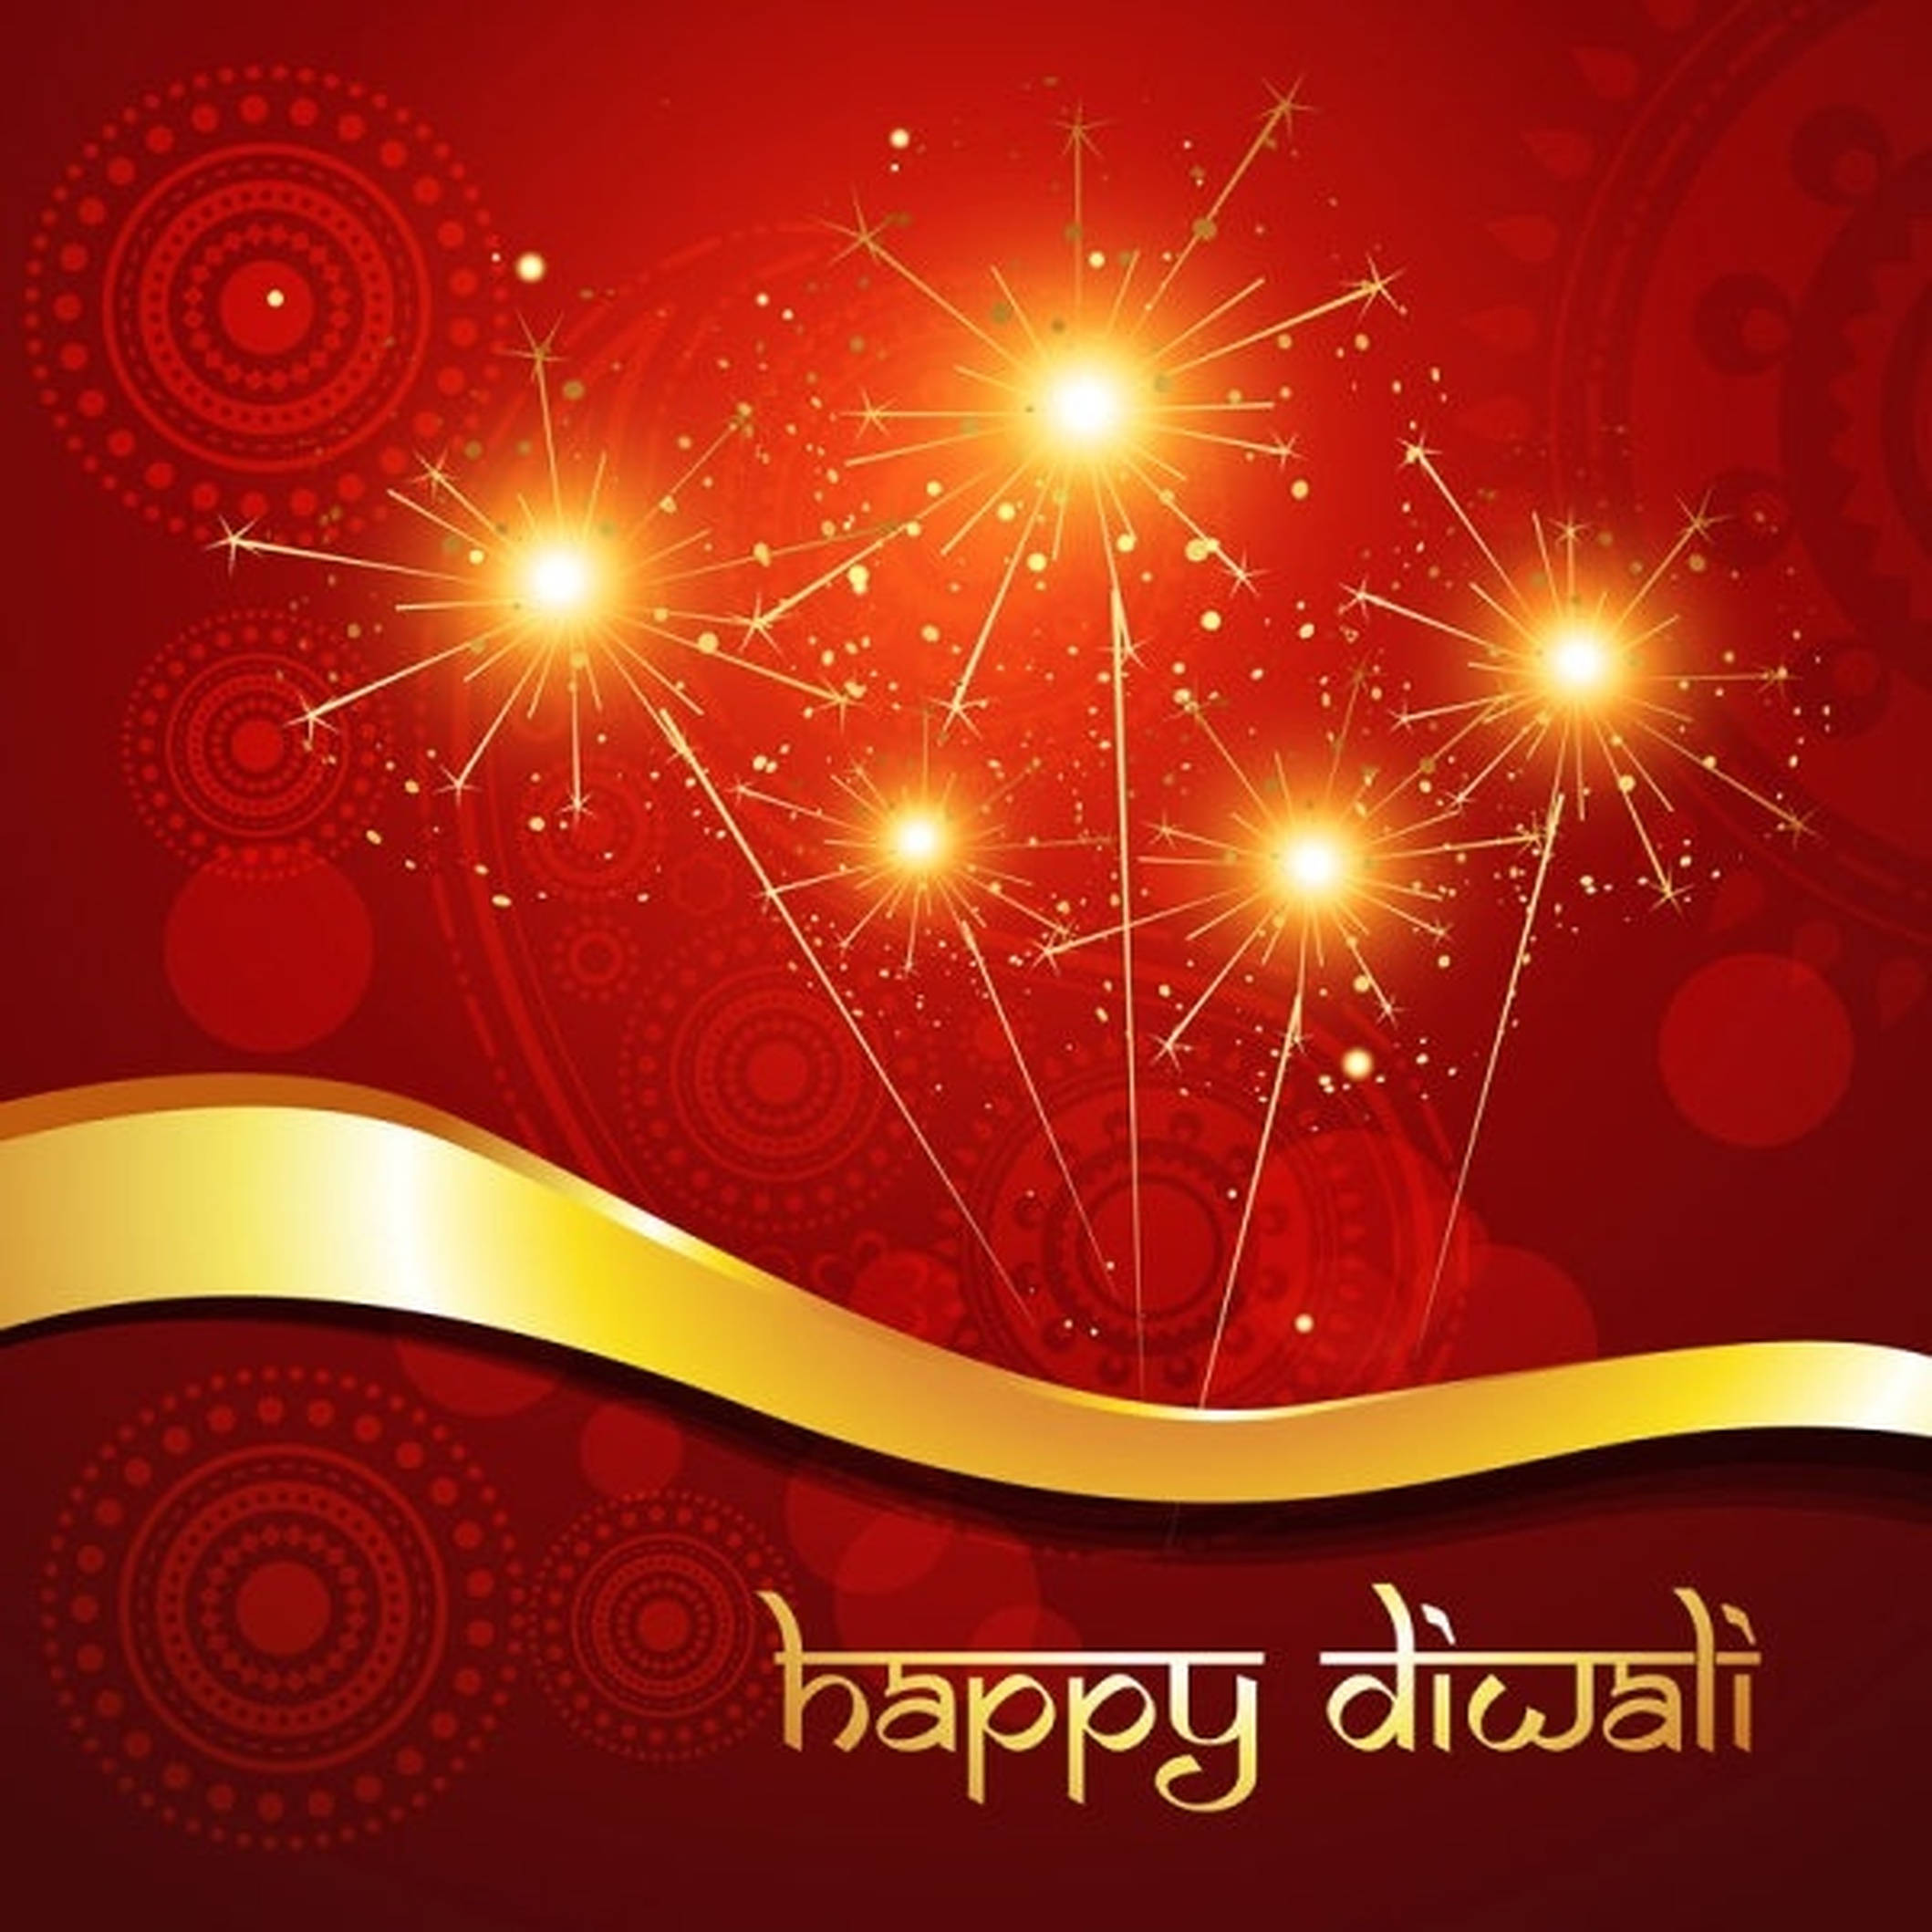 30+ Happy Diwali Wallpapers - Page 2